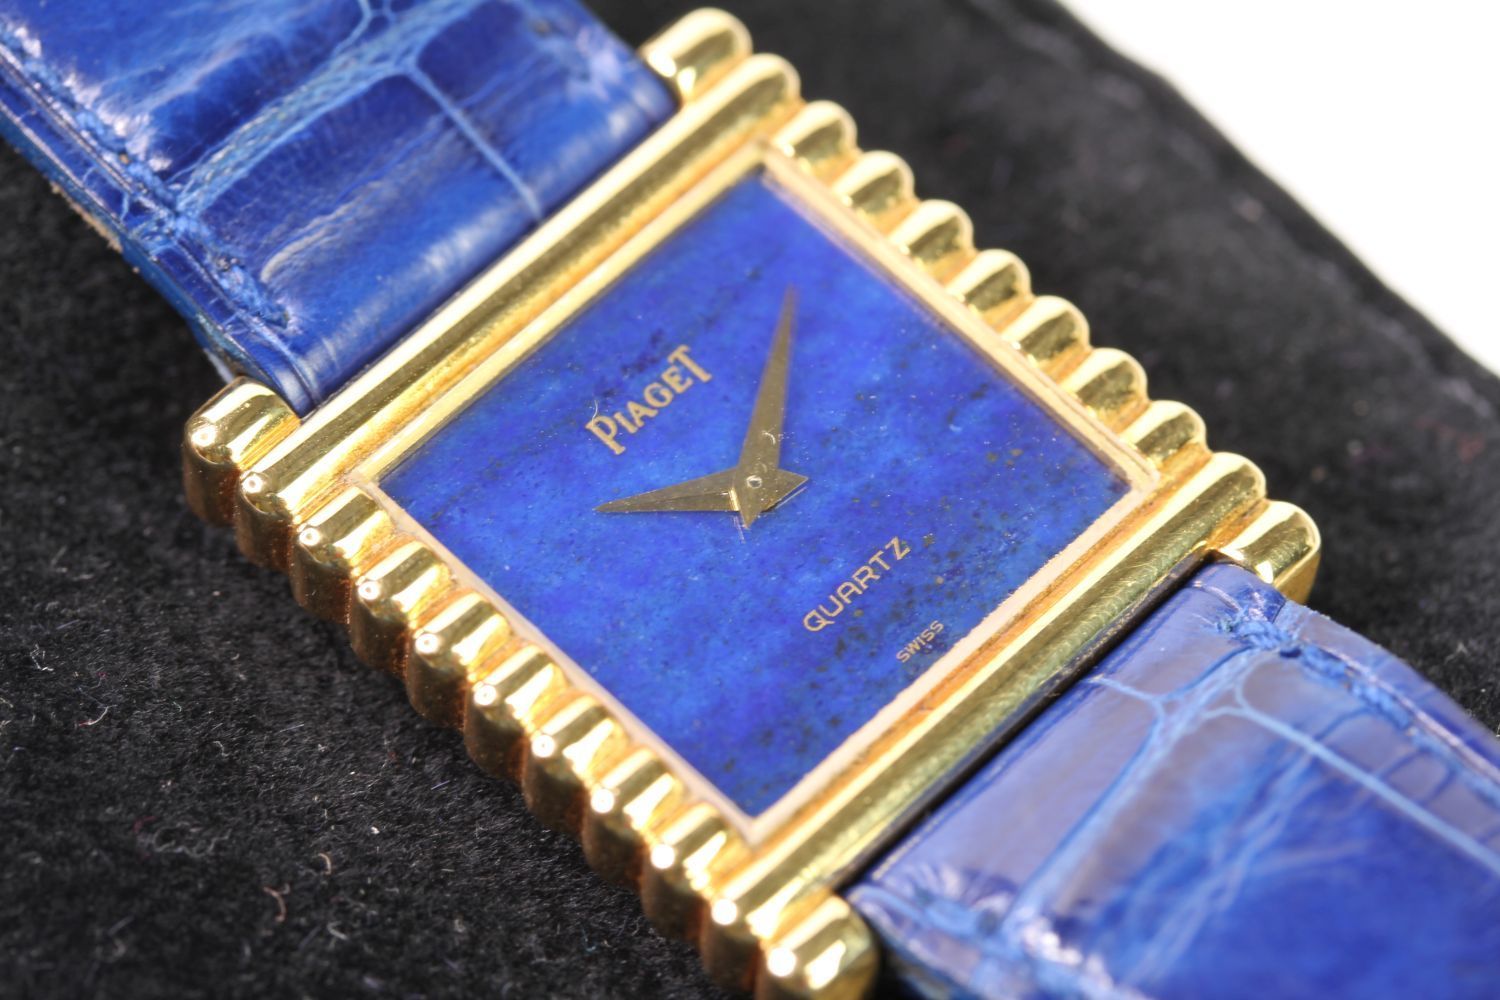 18CT PIAGET LAPIS WRIST WATCH WITH PAPERS AND POUCH REFERENCE 71310, square lapis dial with gold - Image 2 of 4